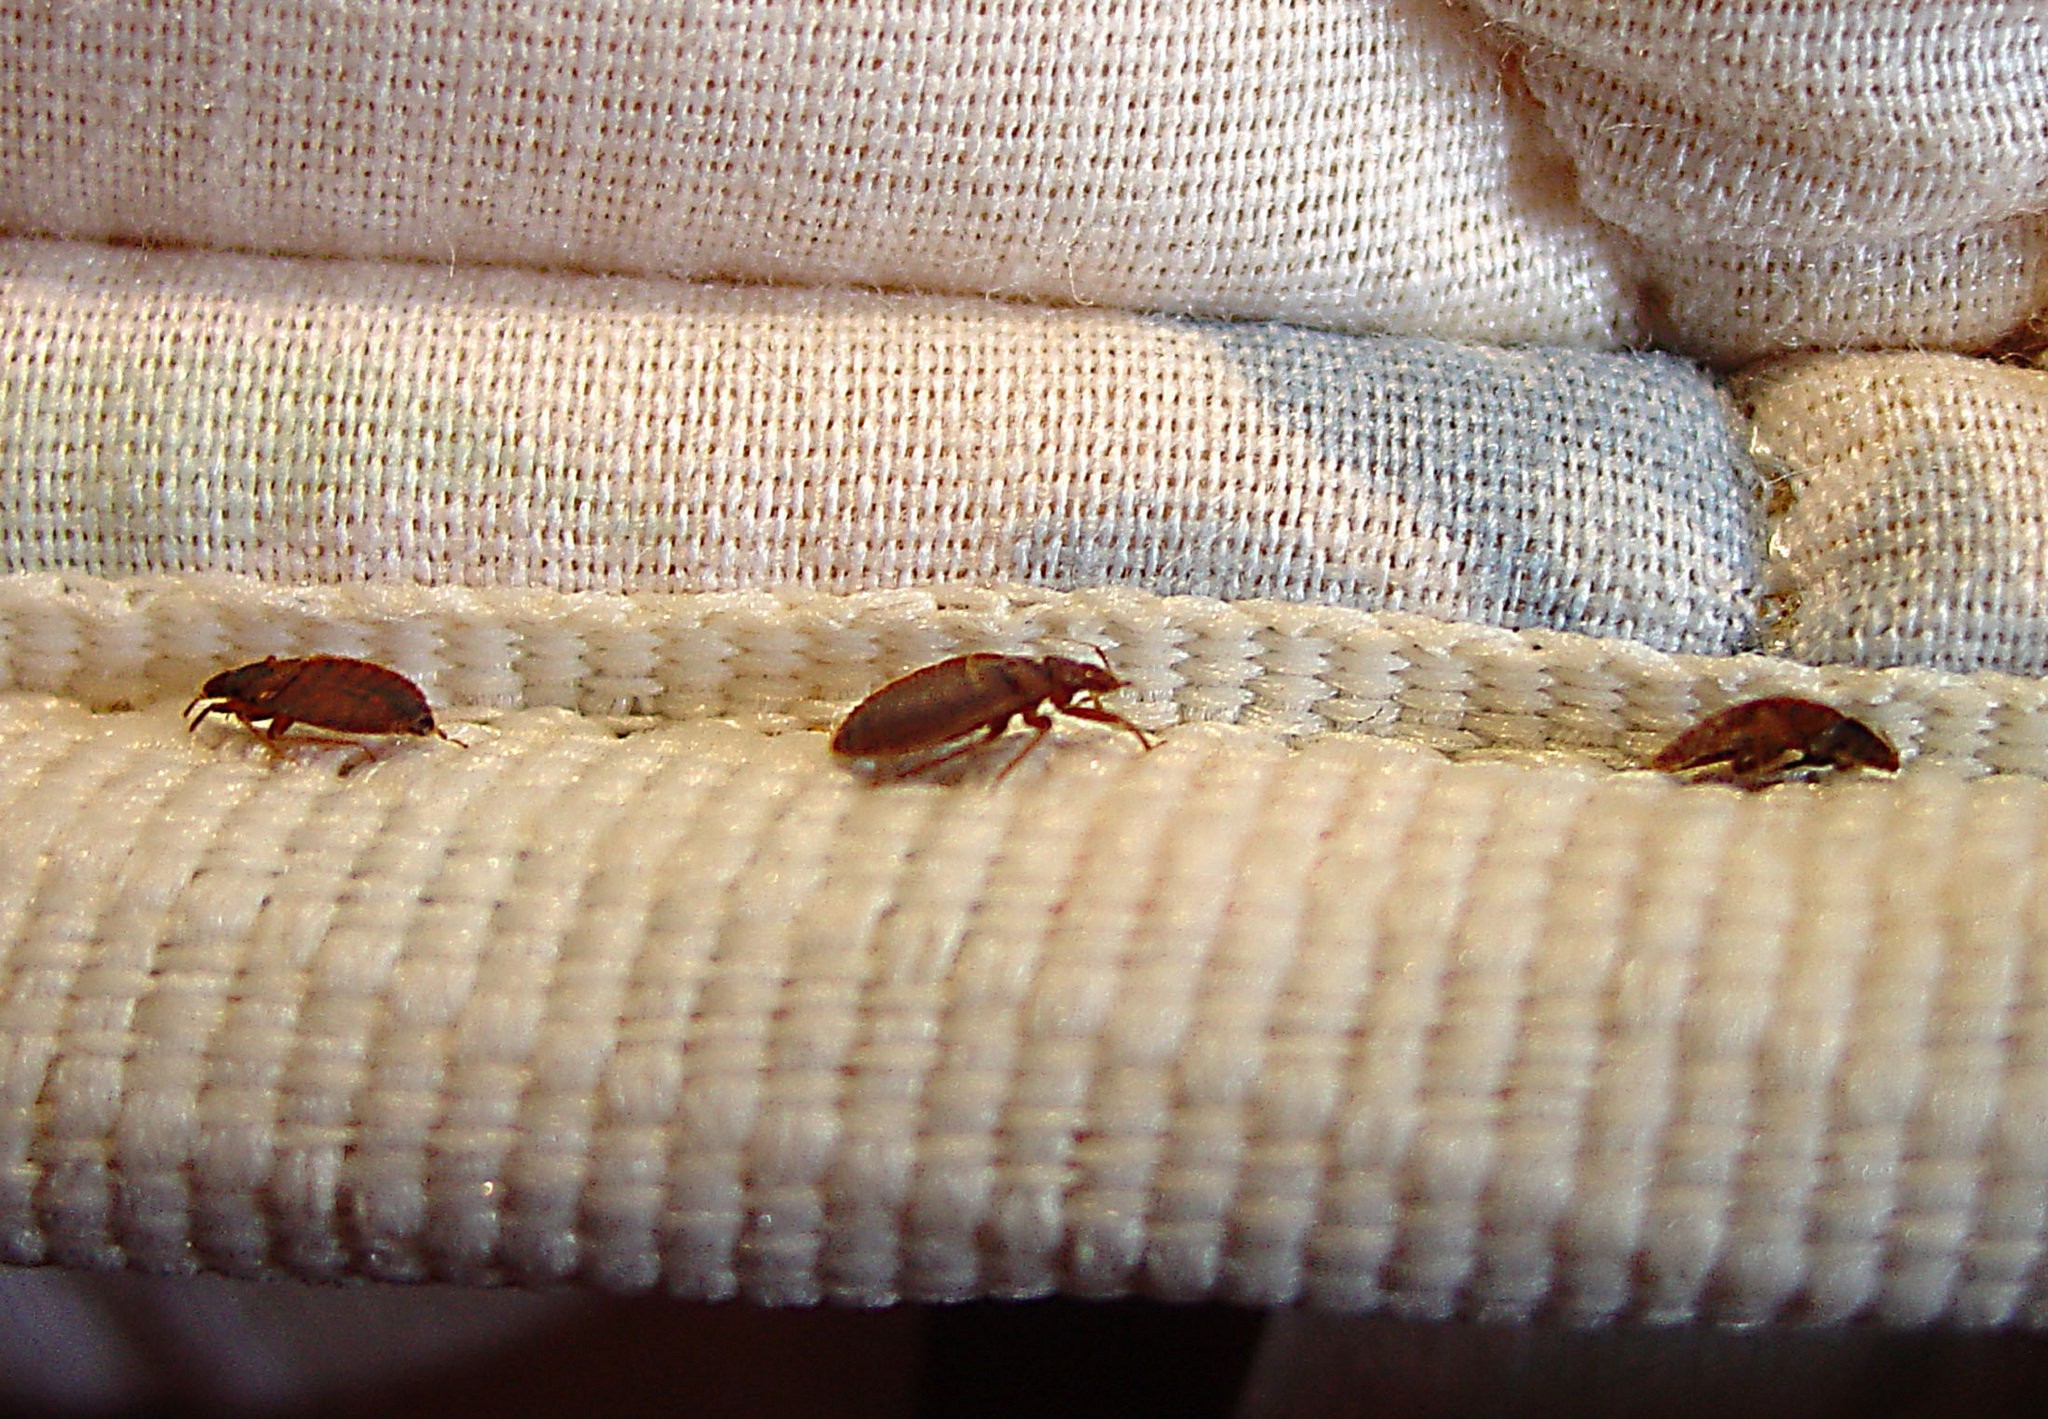 Can Bed Bugs Live In Plastic Bags?